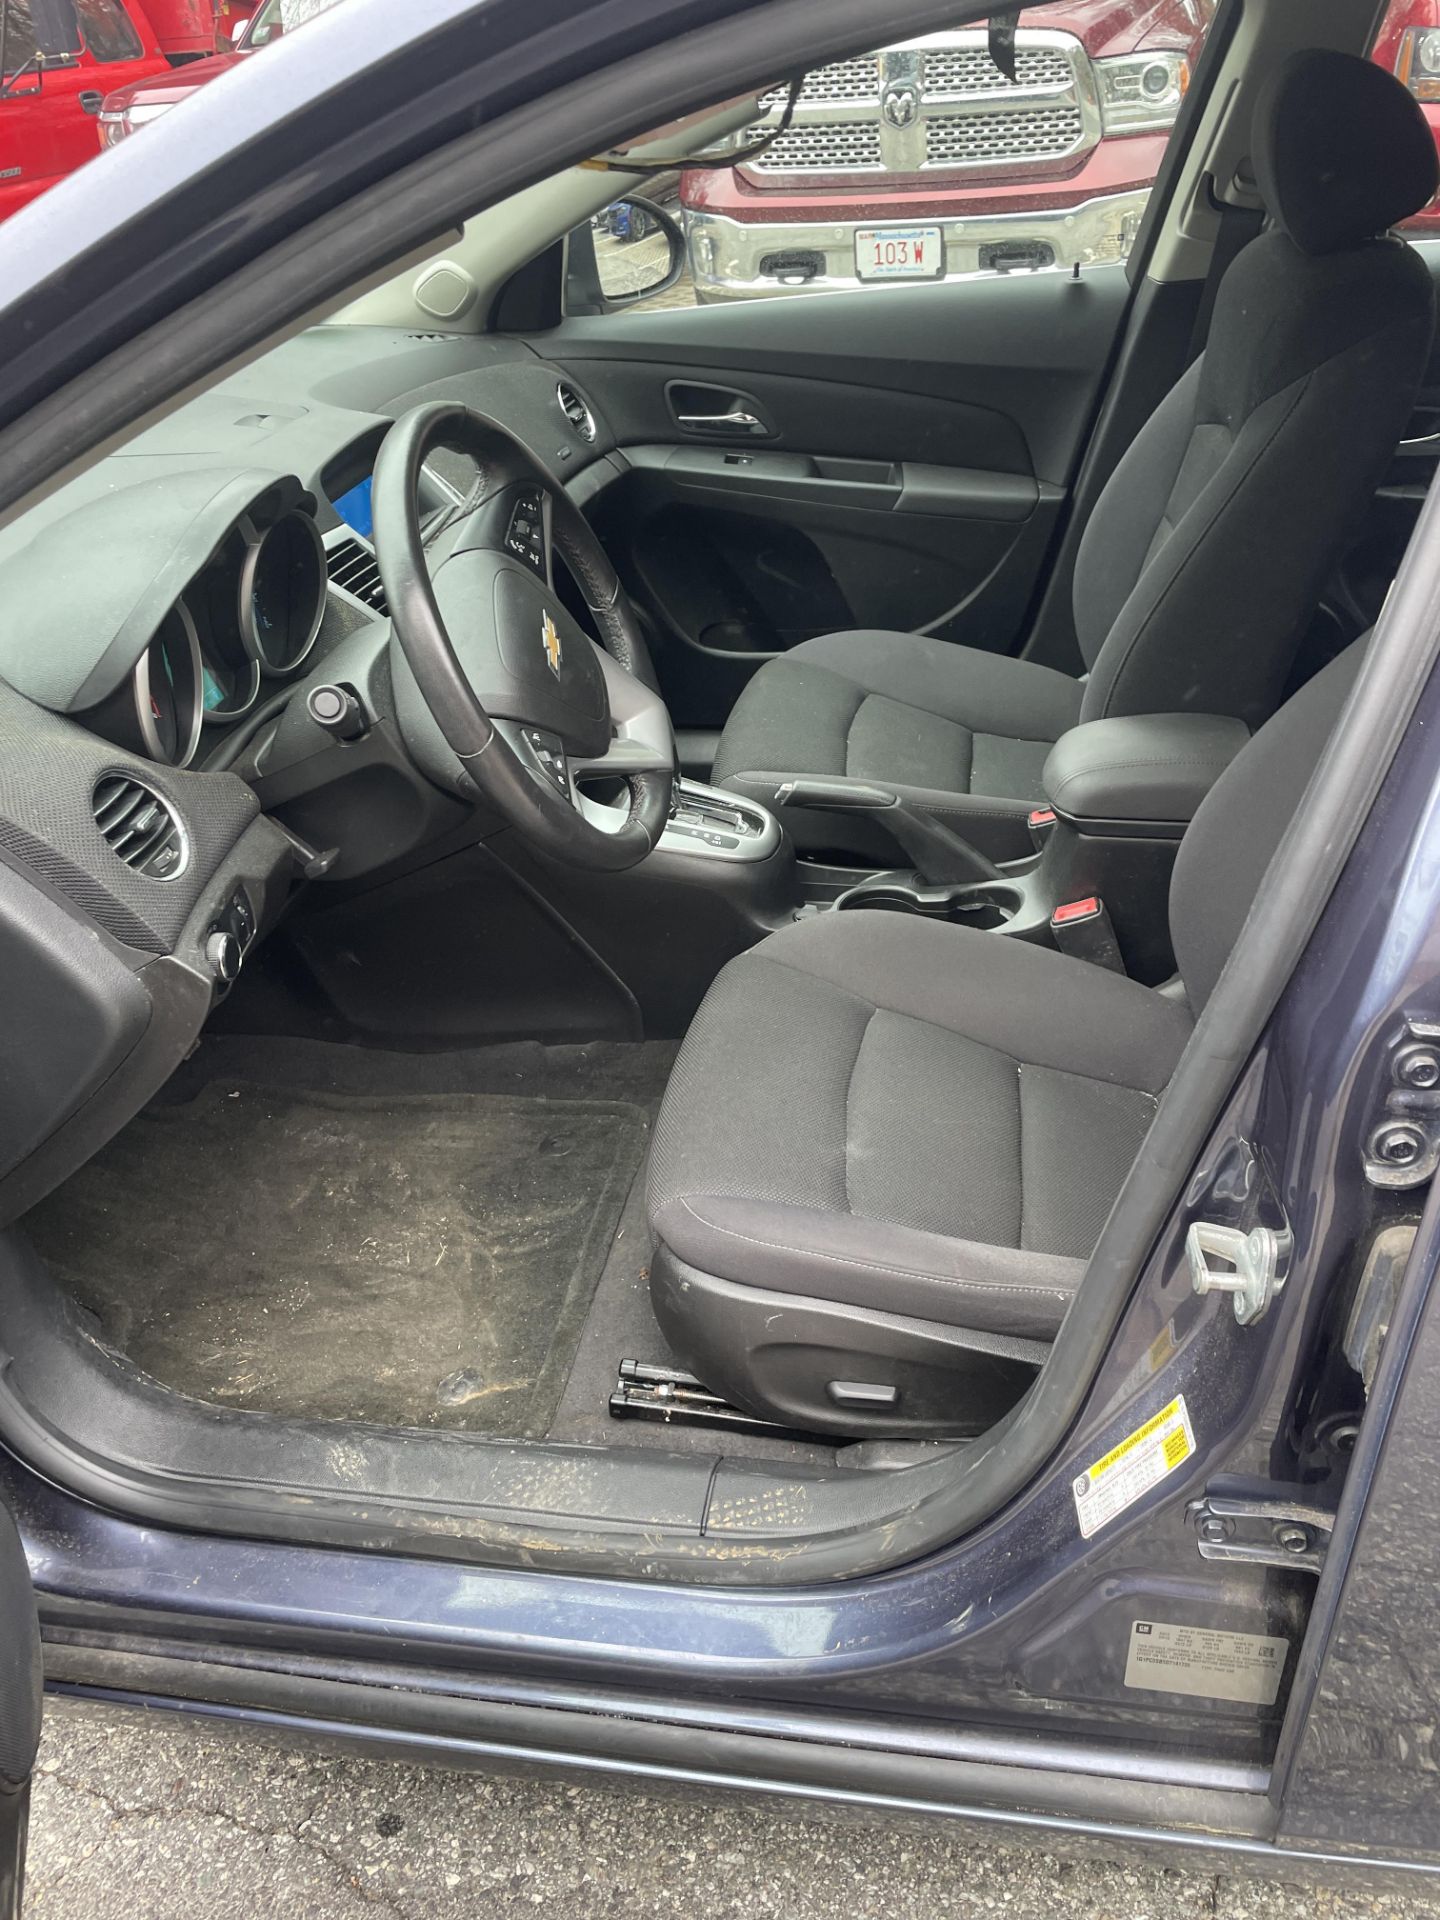 2013 Chevy Cruze Odom: 25,066, Vin:1GC1PC5SB5D7141735 (Has Ceiling Liner Issues) (THIS UNIT CAN'T BE - Image 9 of 16